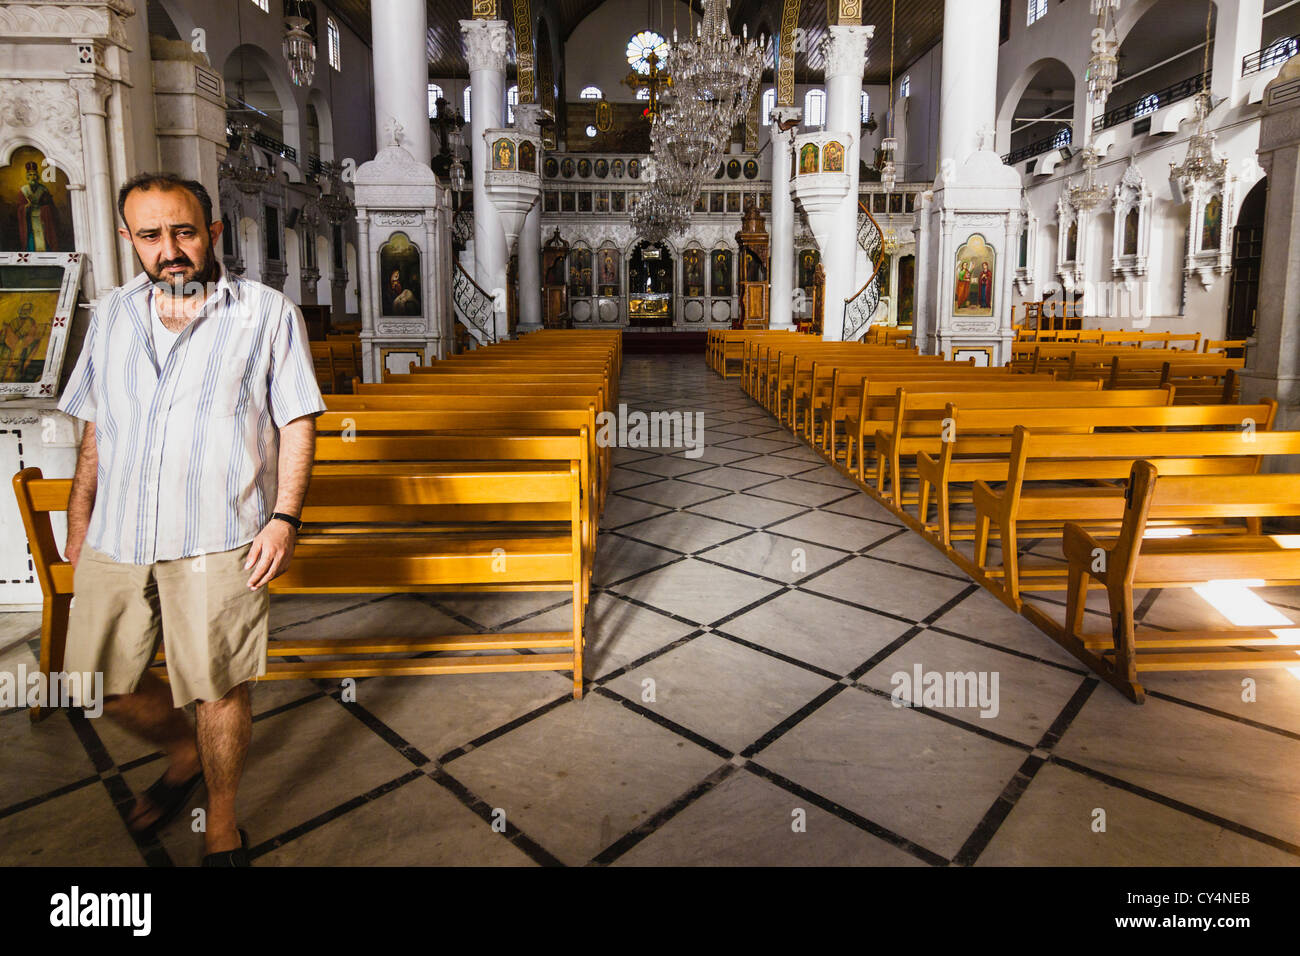 Doorman at the Orthodox Patriarchate. Damascus, Syria Stock Photo